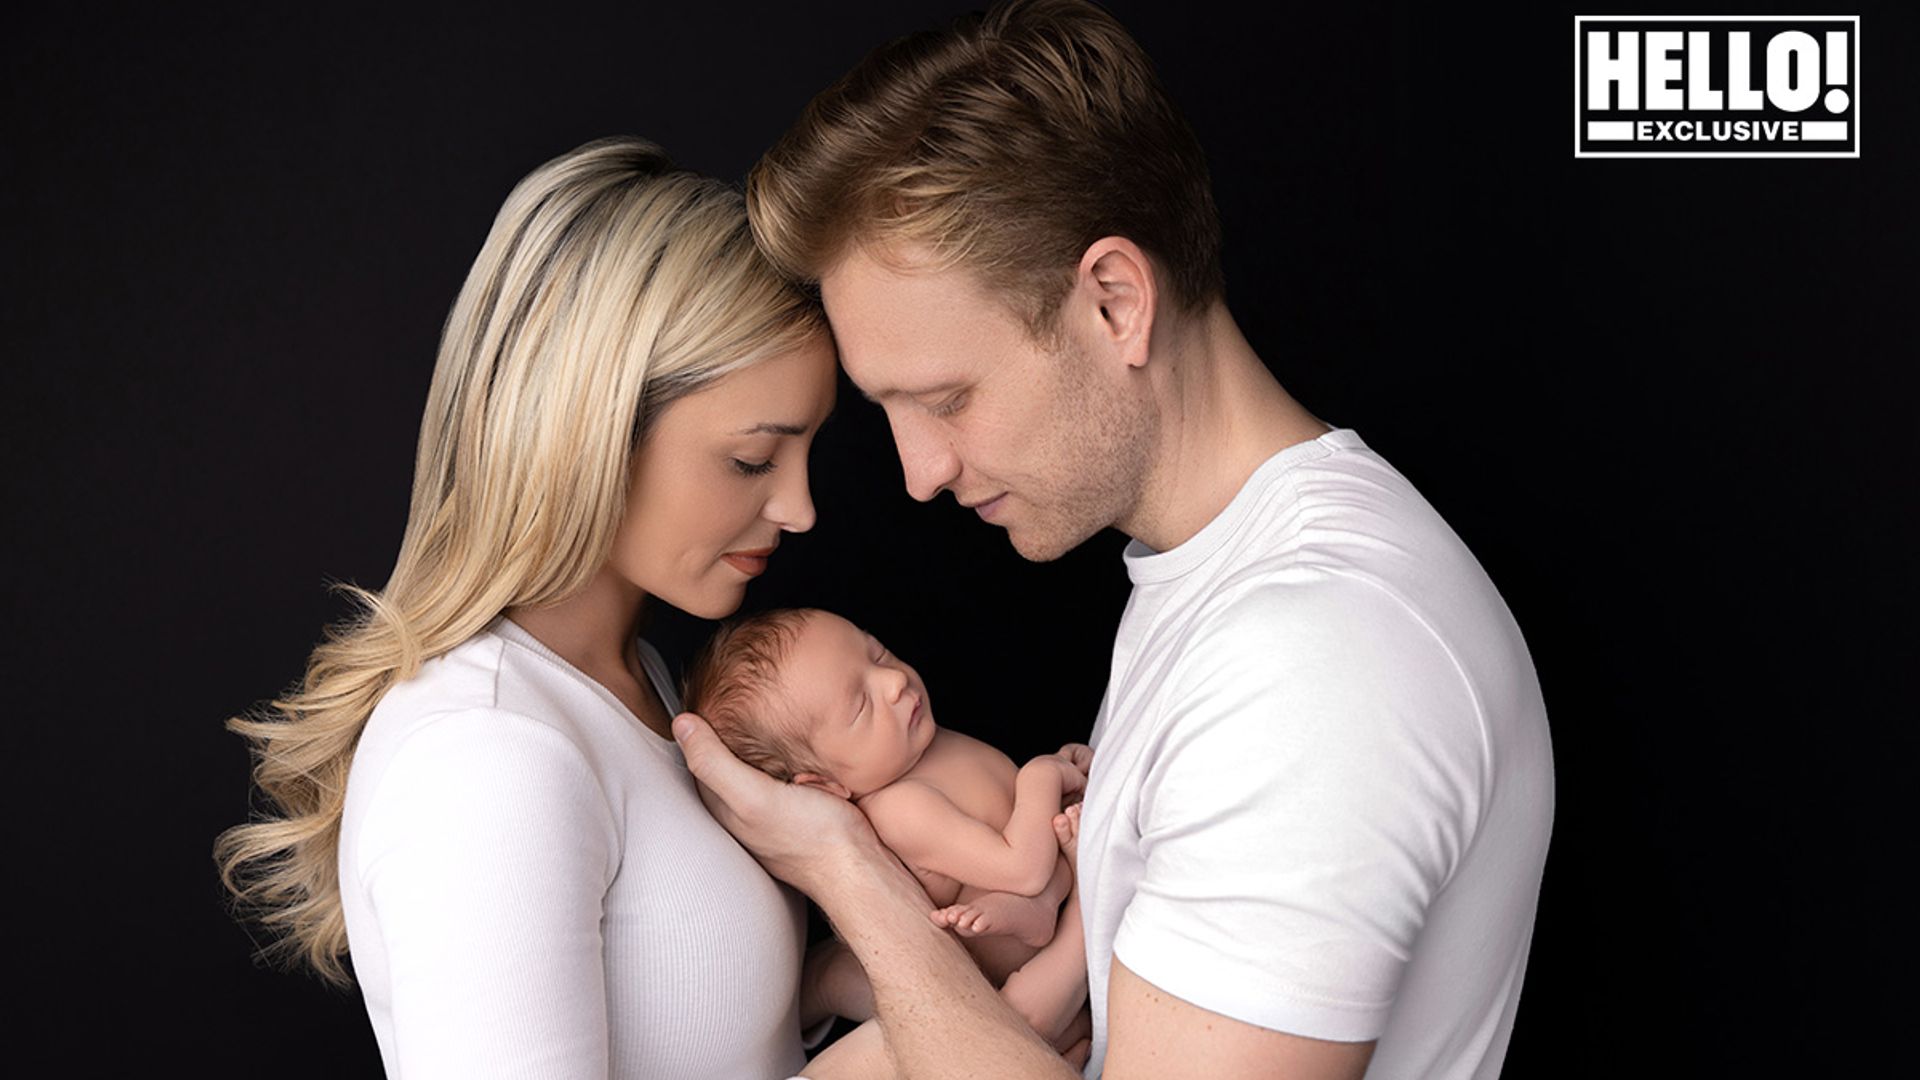 Joshua Wright and wife Hollie reveal baby's name and detail dramatic birth - EXCLUSIVE